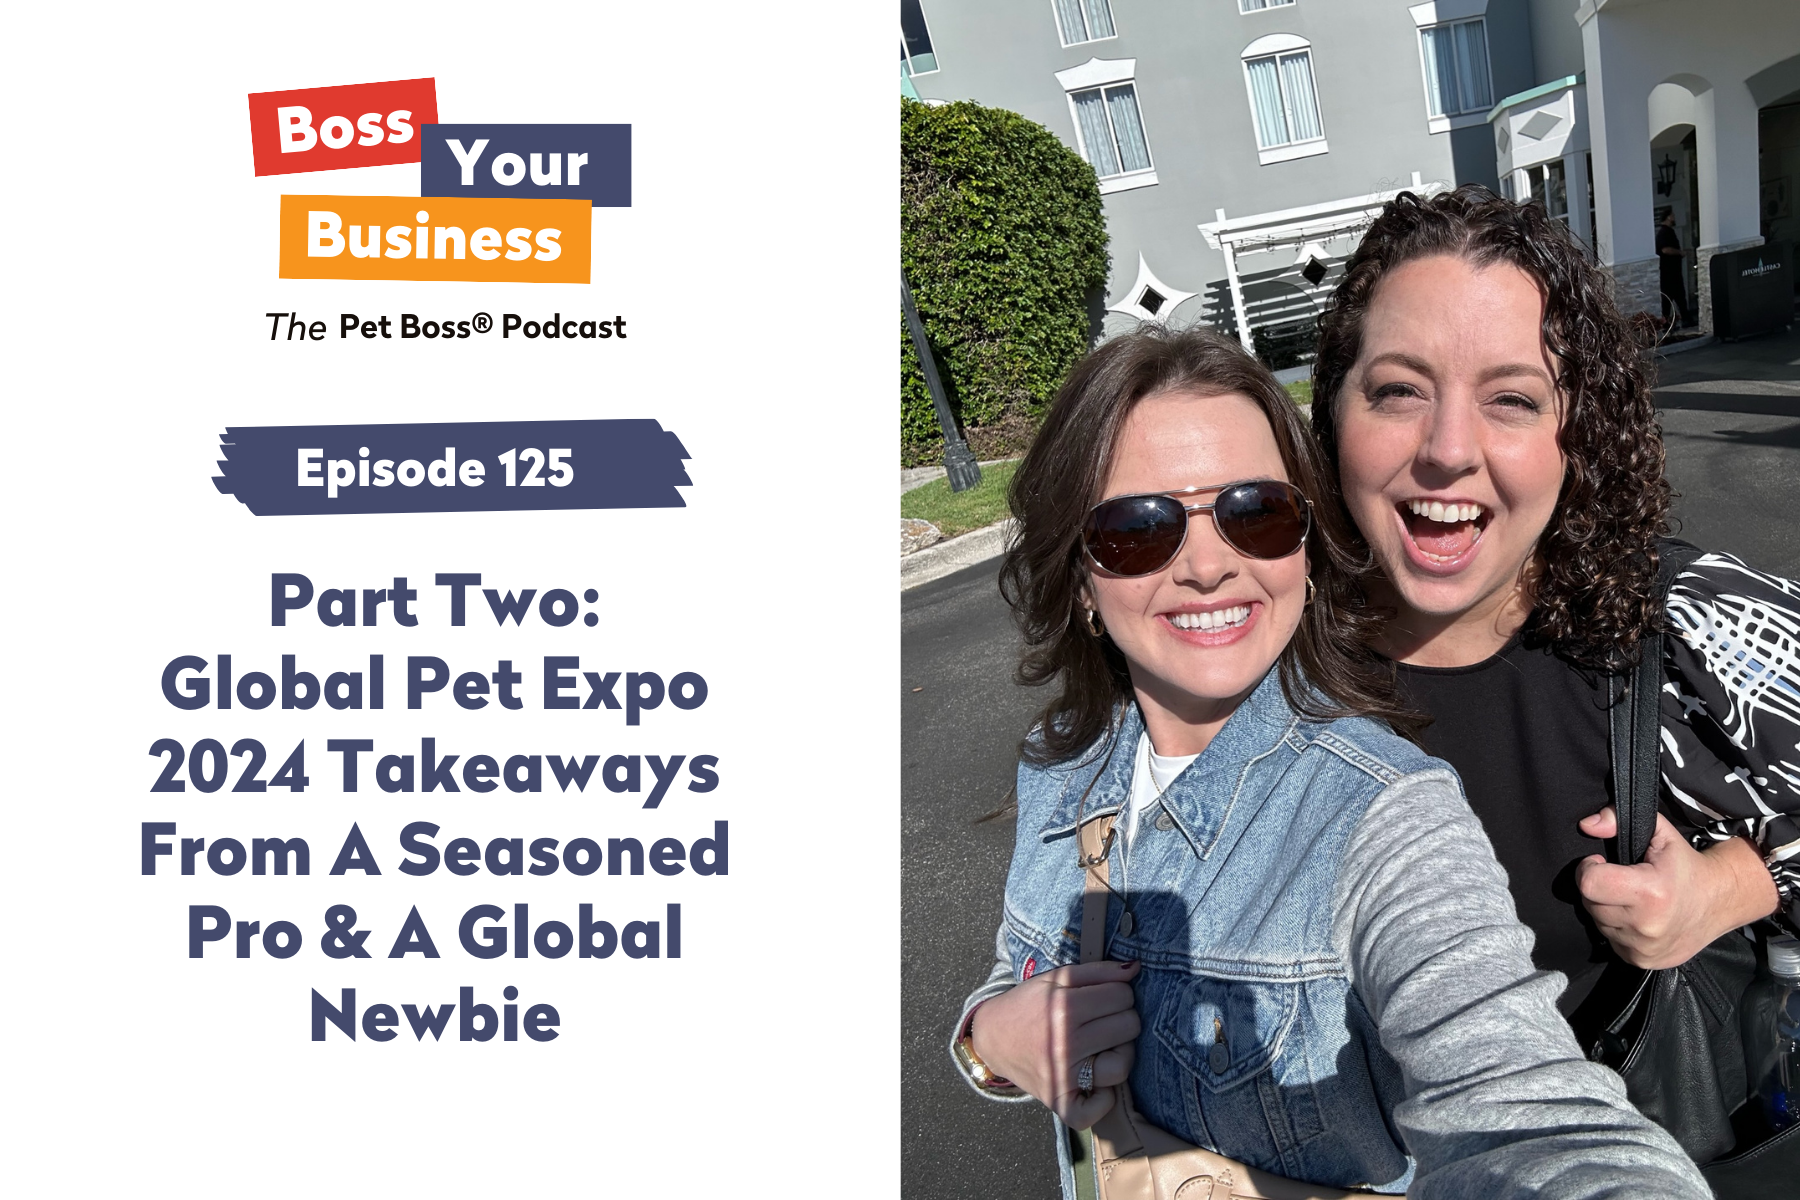 Episode 125 | Part Two: Global Pet Expo 2024 Takeaways From A Seasoned Pro & A Global Newbie